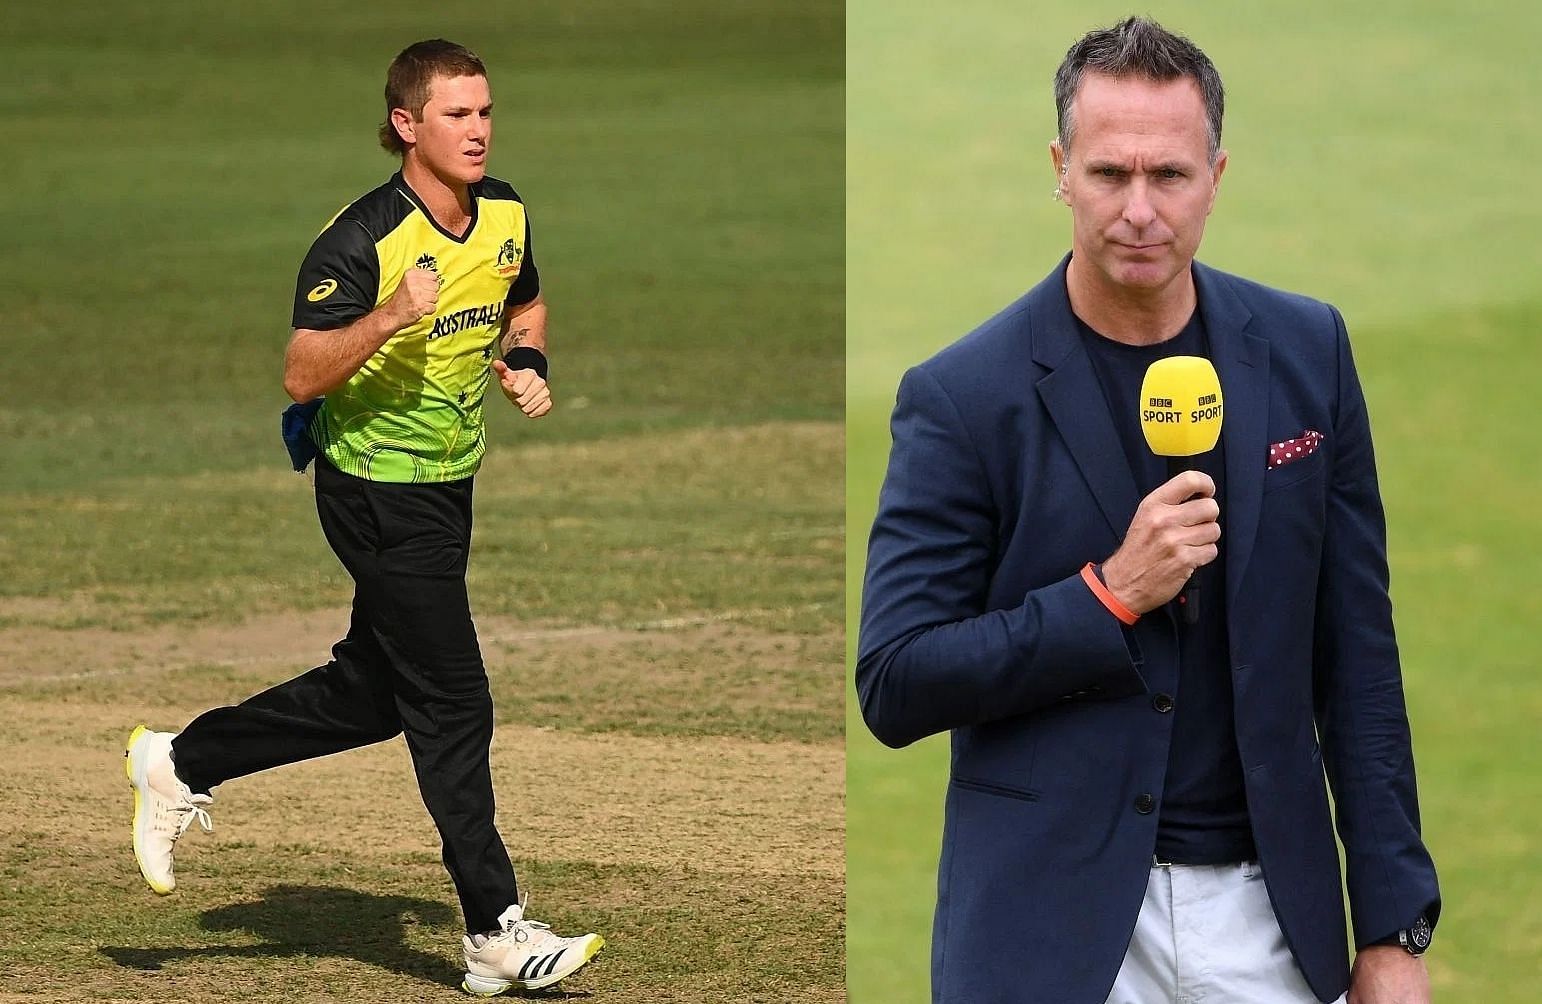 Azam Zampa and Michael Vaughan. Pics: Getty Images